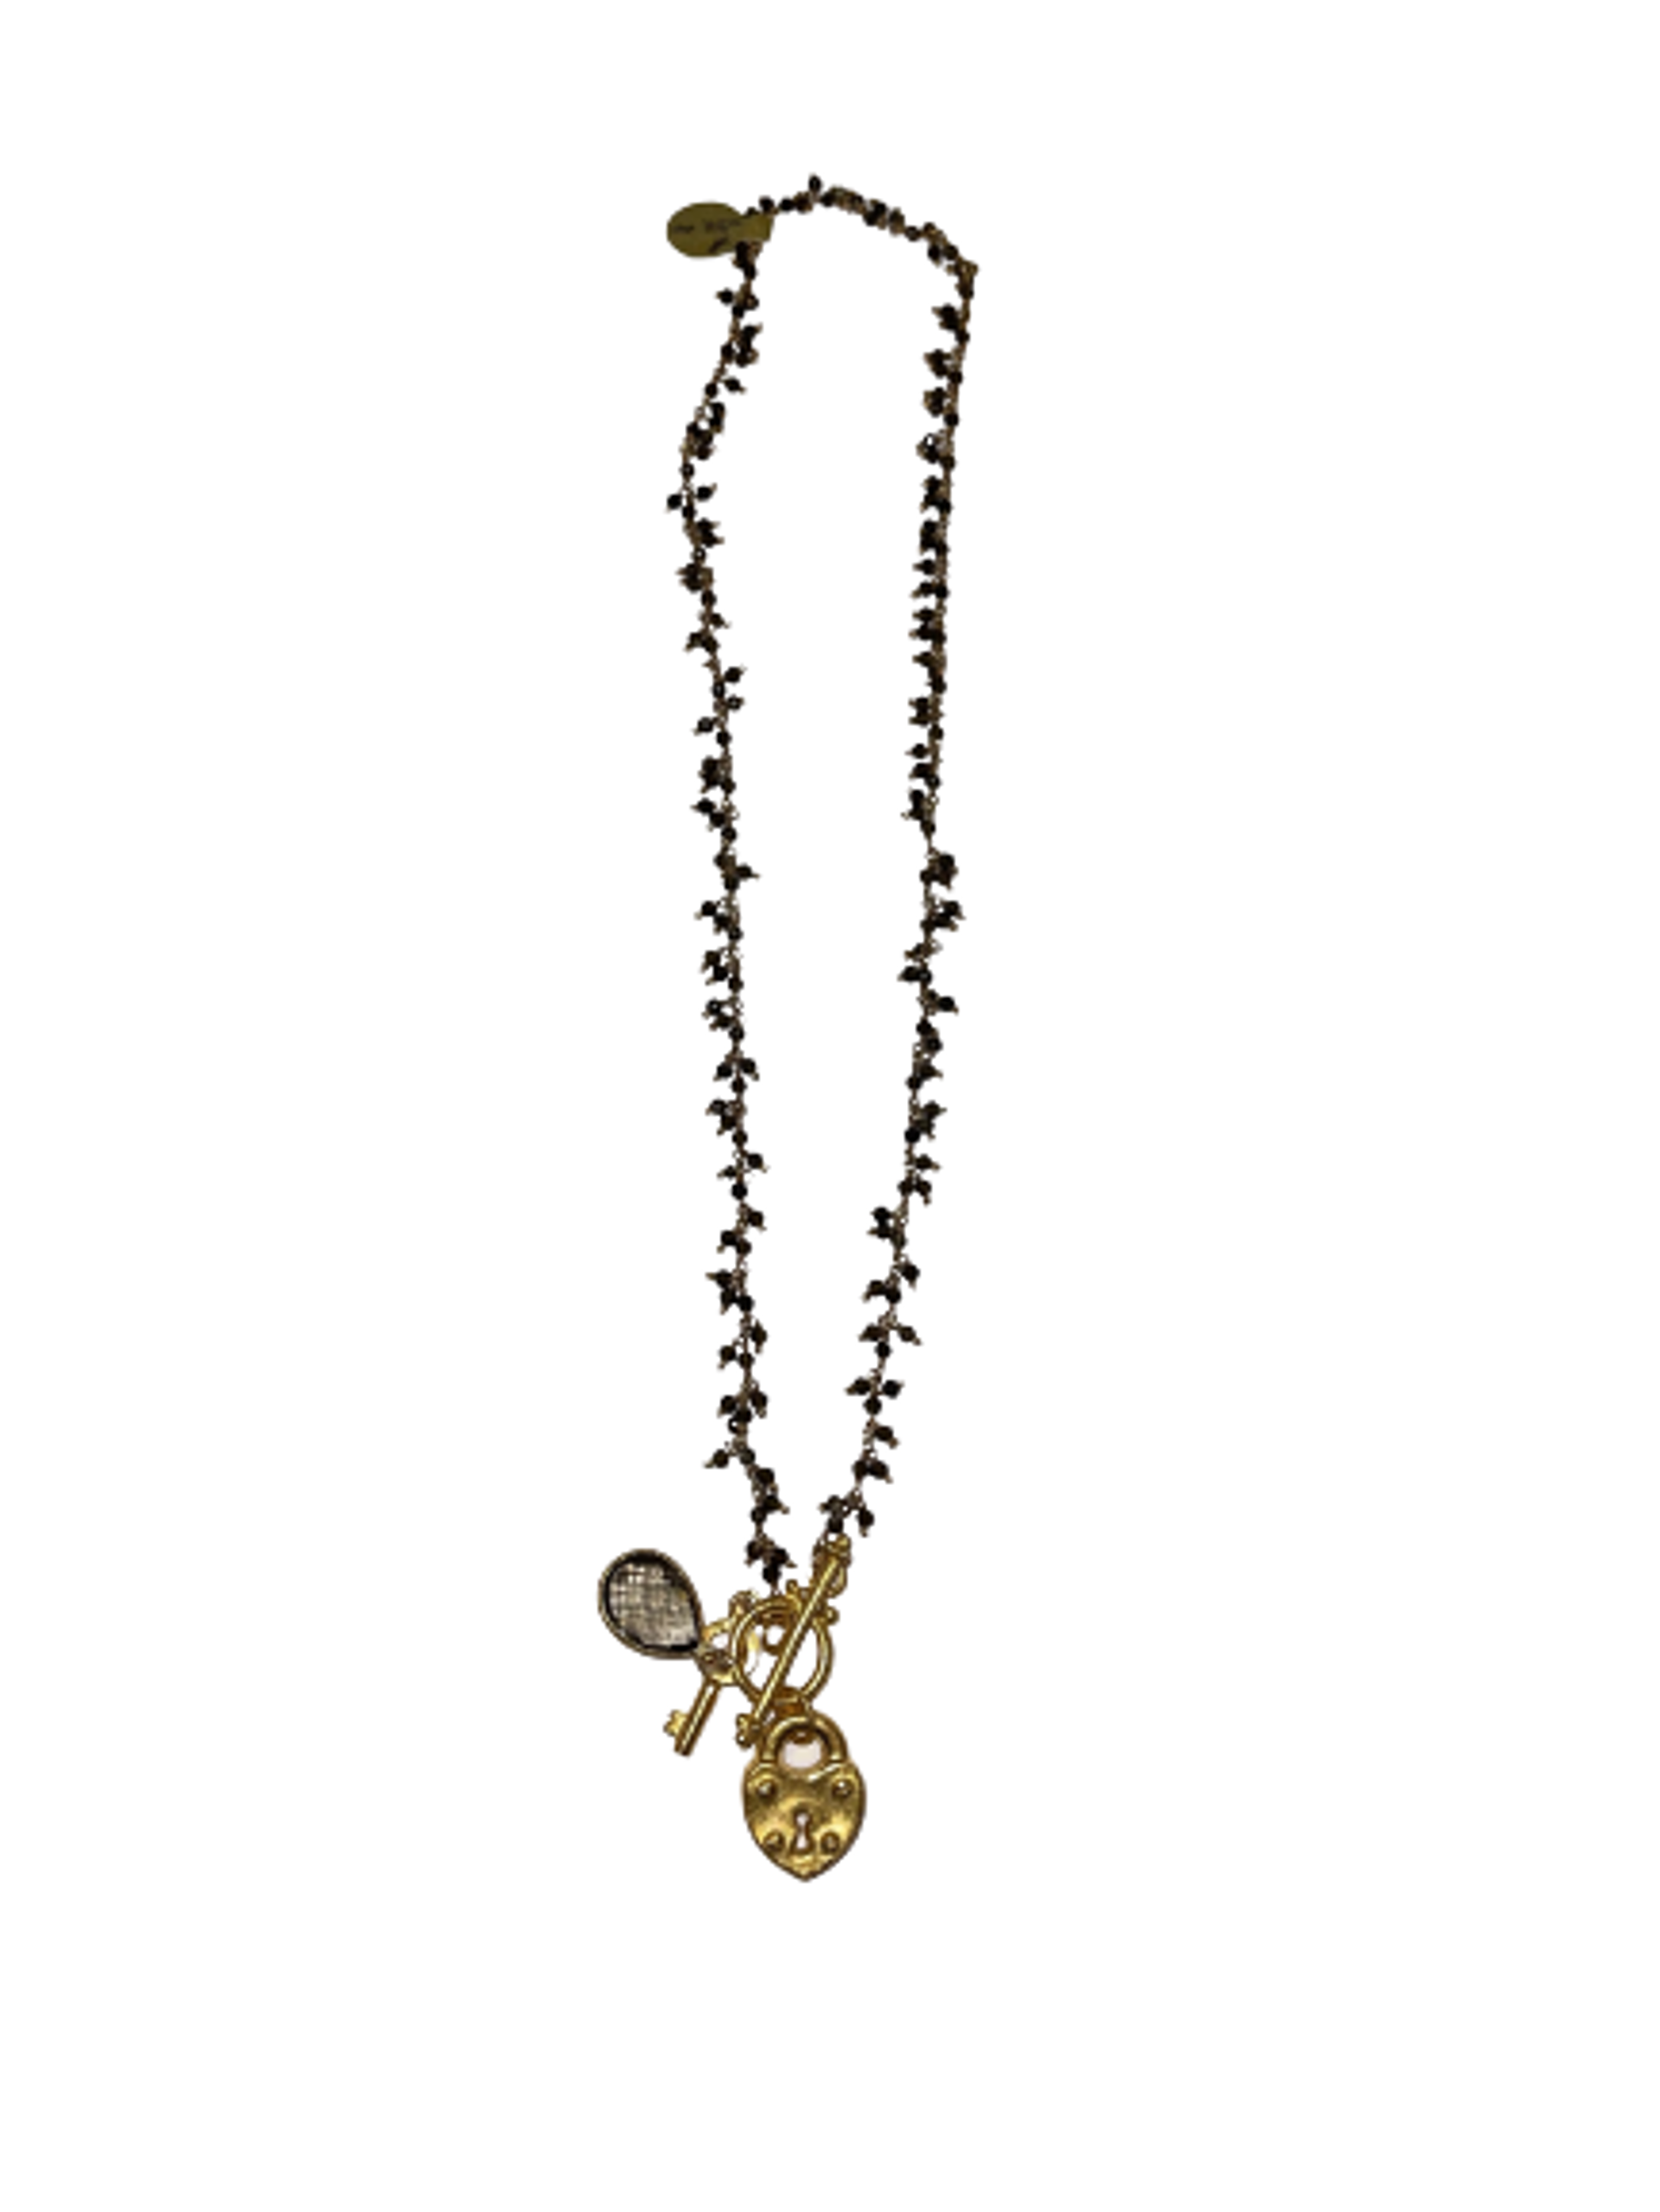 Gold Vermeil and Smokey Quartz Dangle Chain Charm Necklace with a Gold Plated  Heart Lock Charm and Key Charm as well as a small smokey quartz bezel by Karen Birchmier